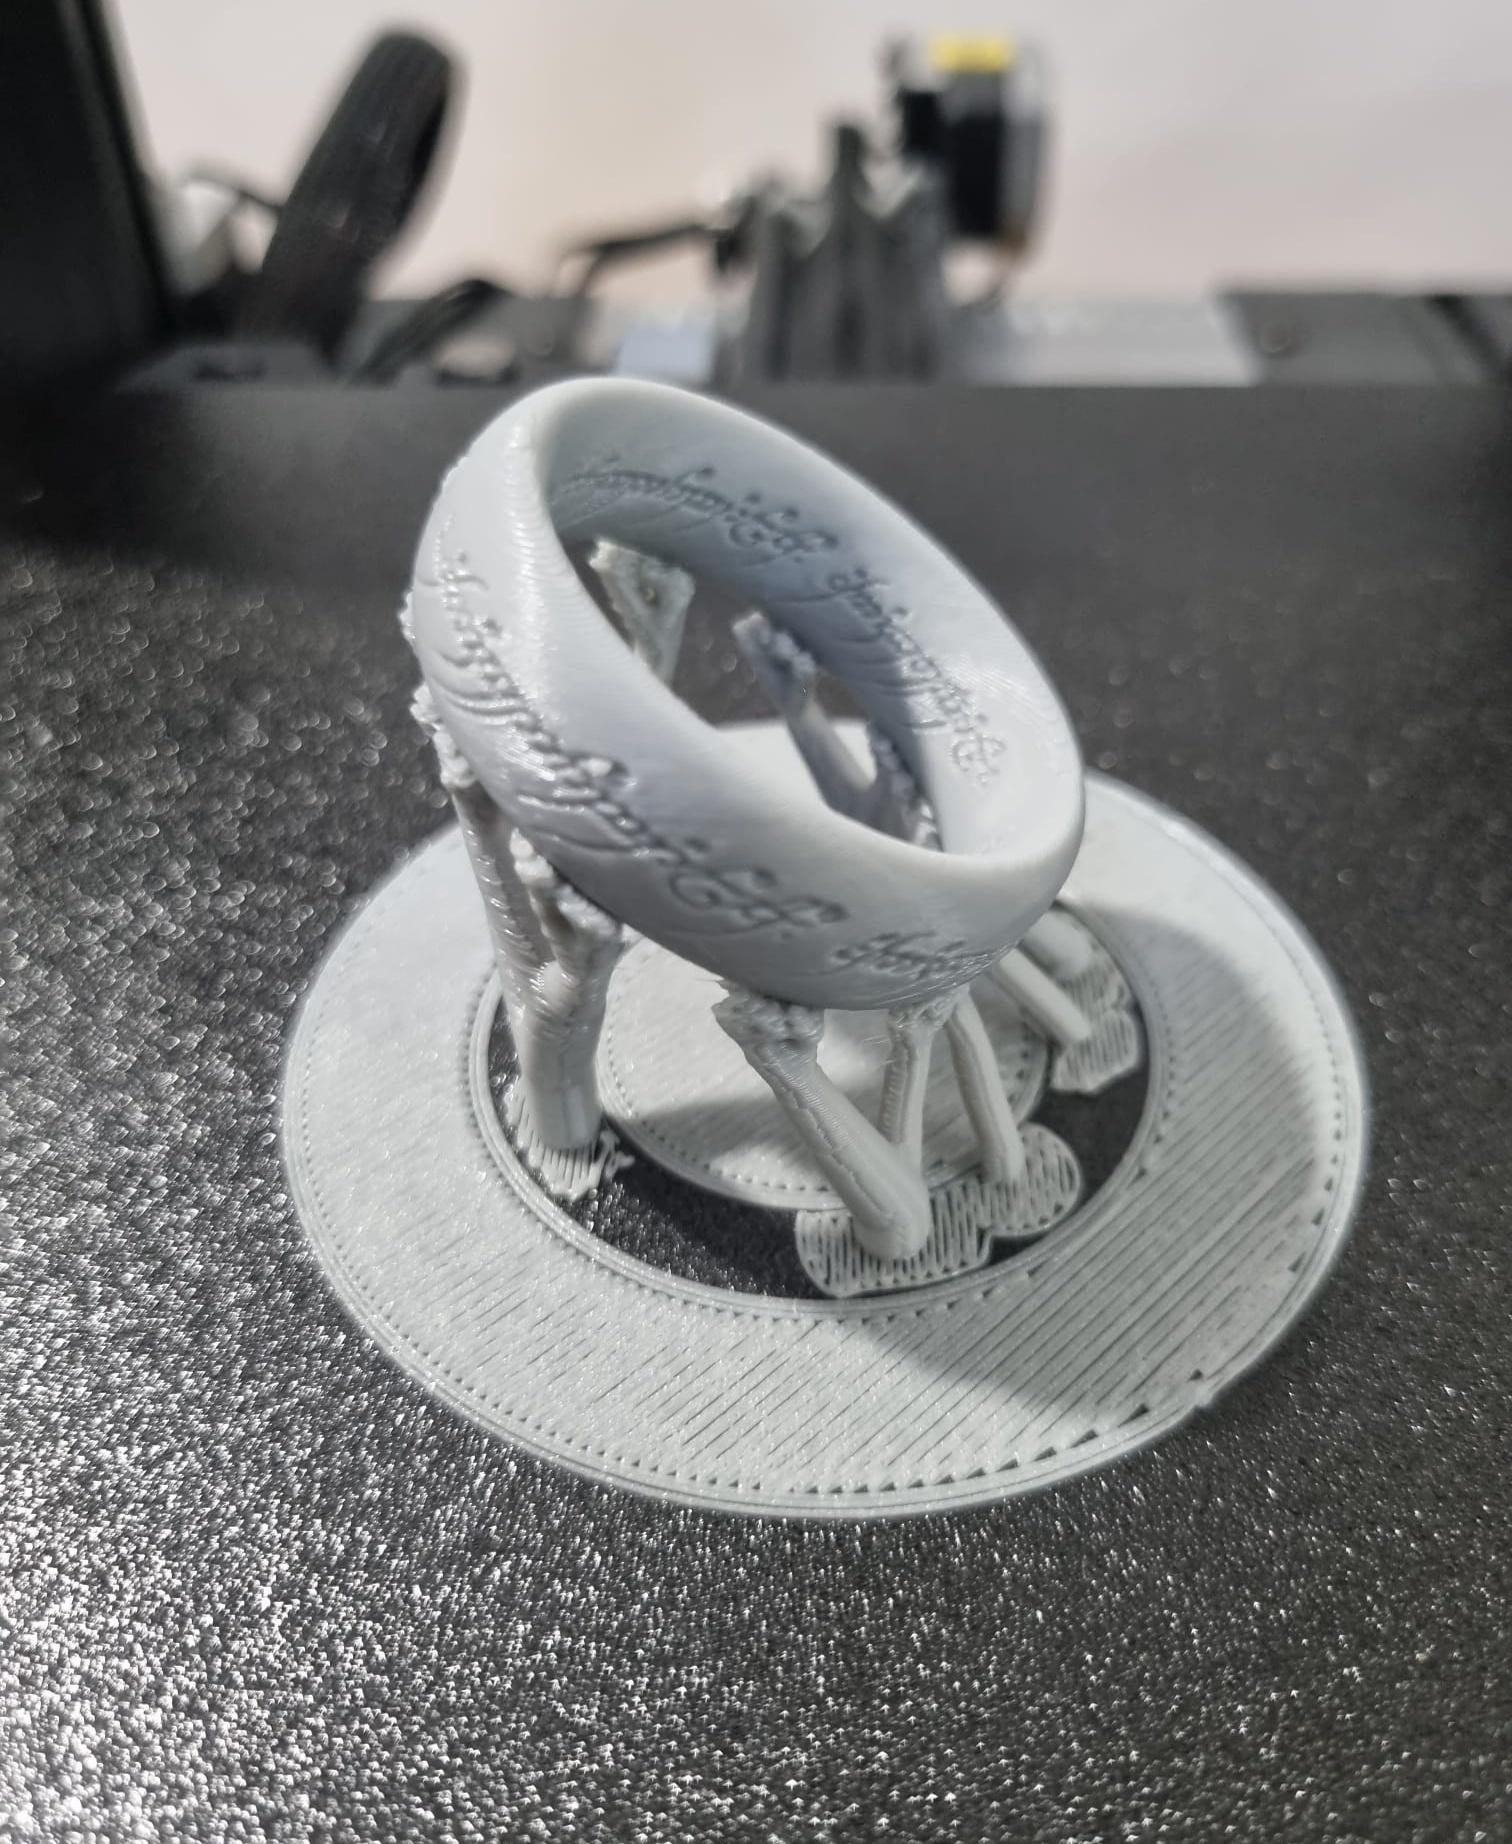 The One ring organice support - Great design, beautifully made. For some reason when I tried to print it at 0.1 layer height, it failed twice (the supports got all mashed up) but first go at 0.2, and it worked perfectly. I'll put on my 0.2 nozzle and try again. This was printed at 50% size (for lack of filament). - 3d model